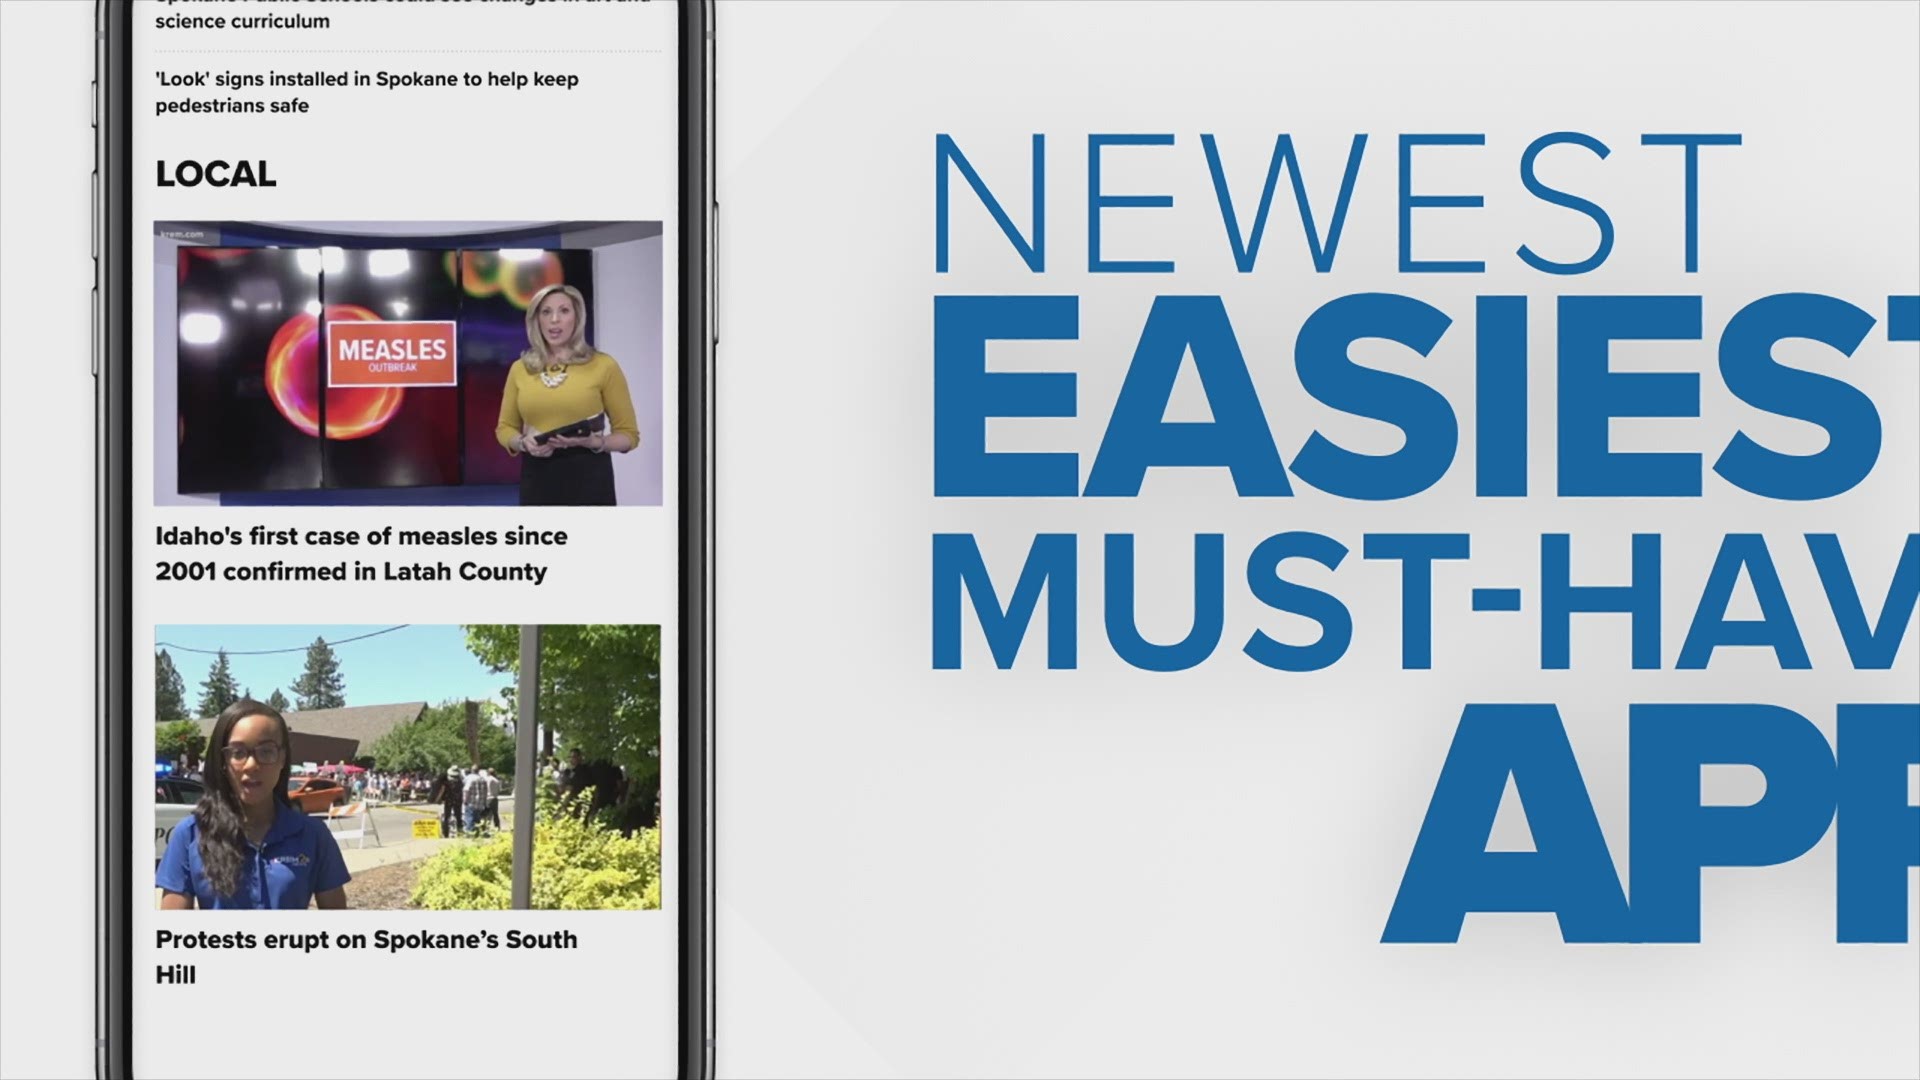 Download the new KREM 2 mobile app on your iPhone or Android now!